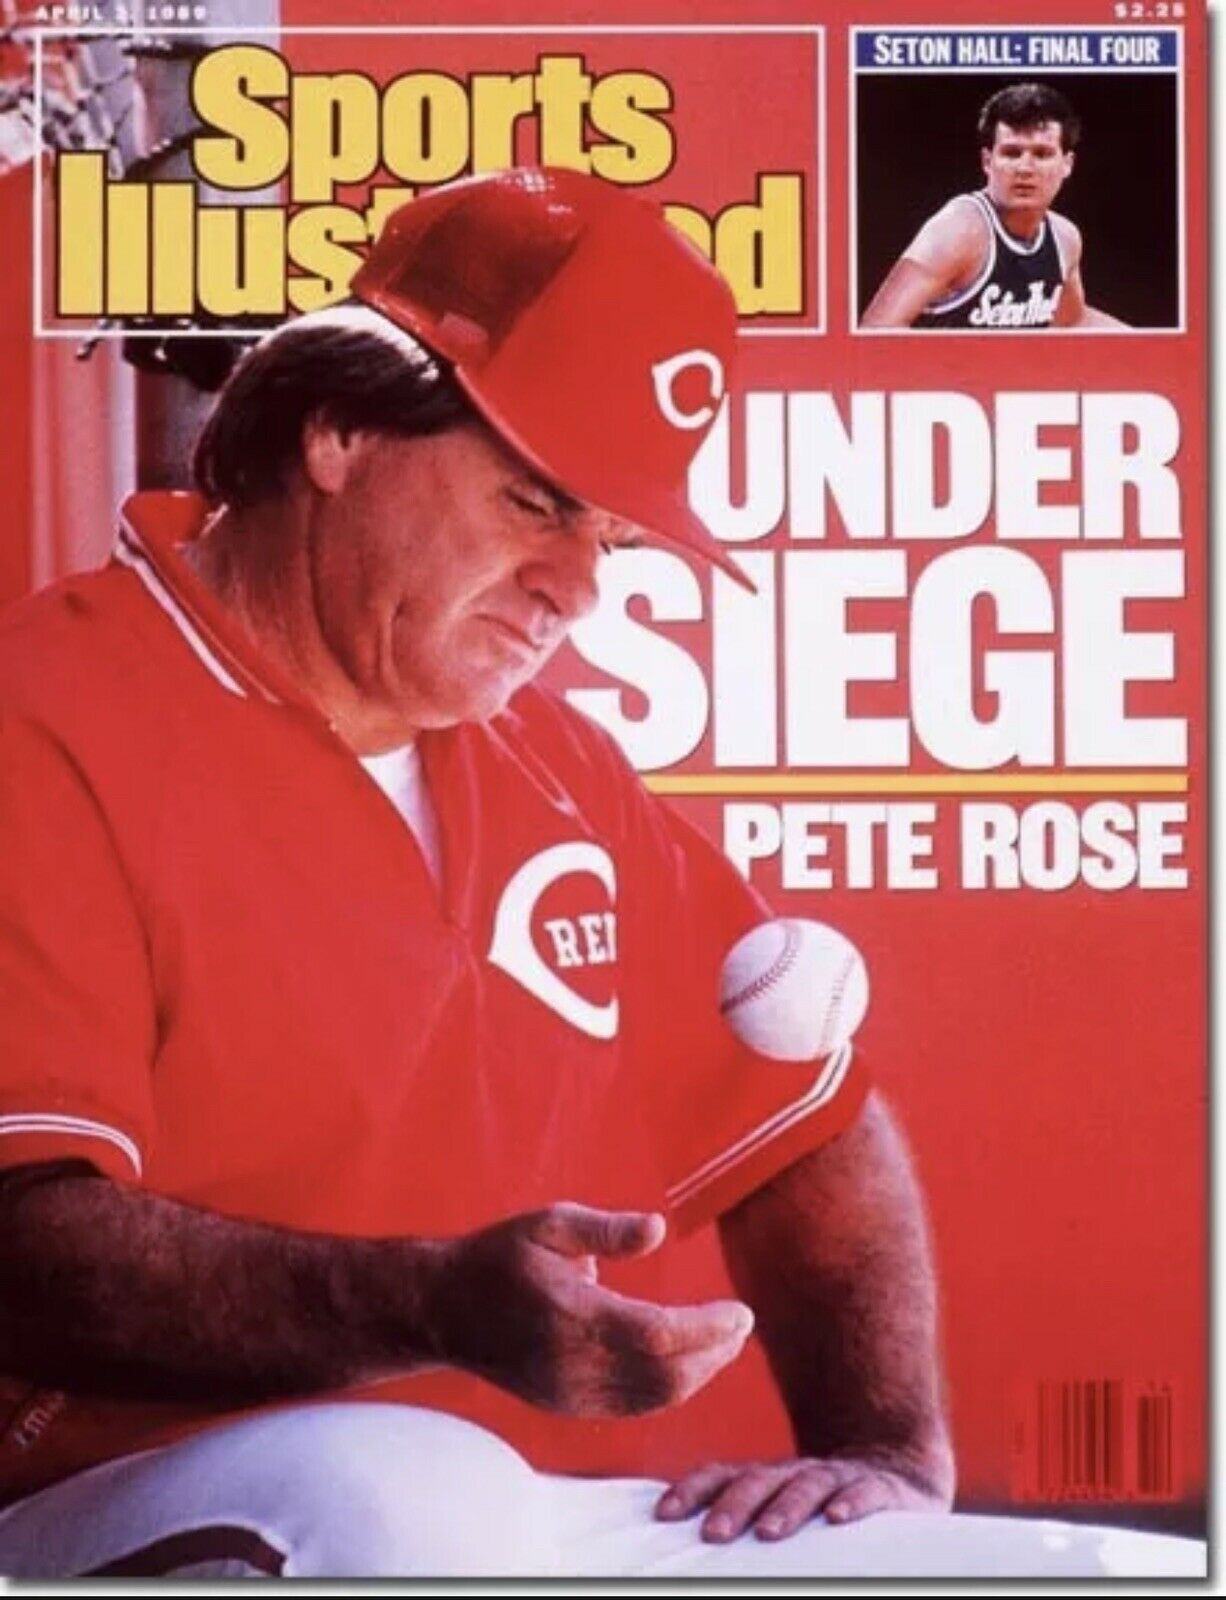 Pete Rose on Sports Illustrated cover (SICOVERS.COM)